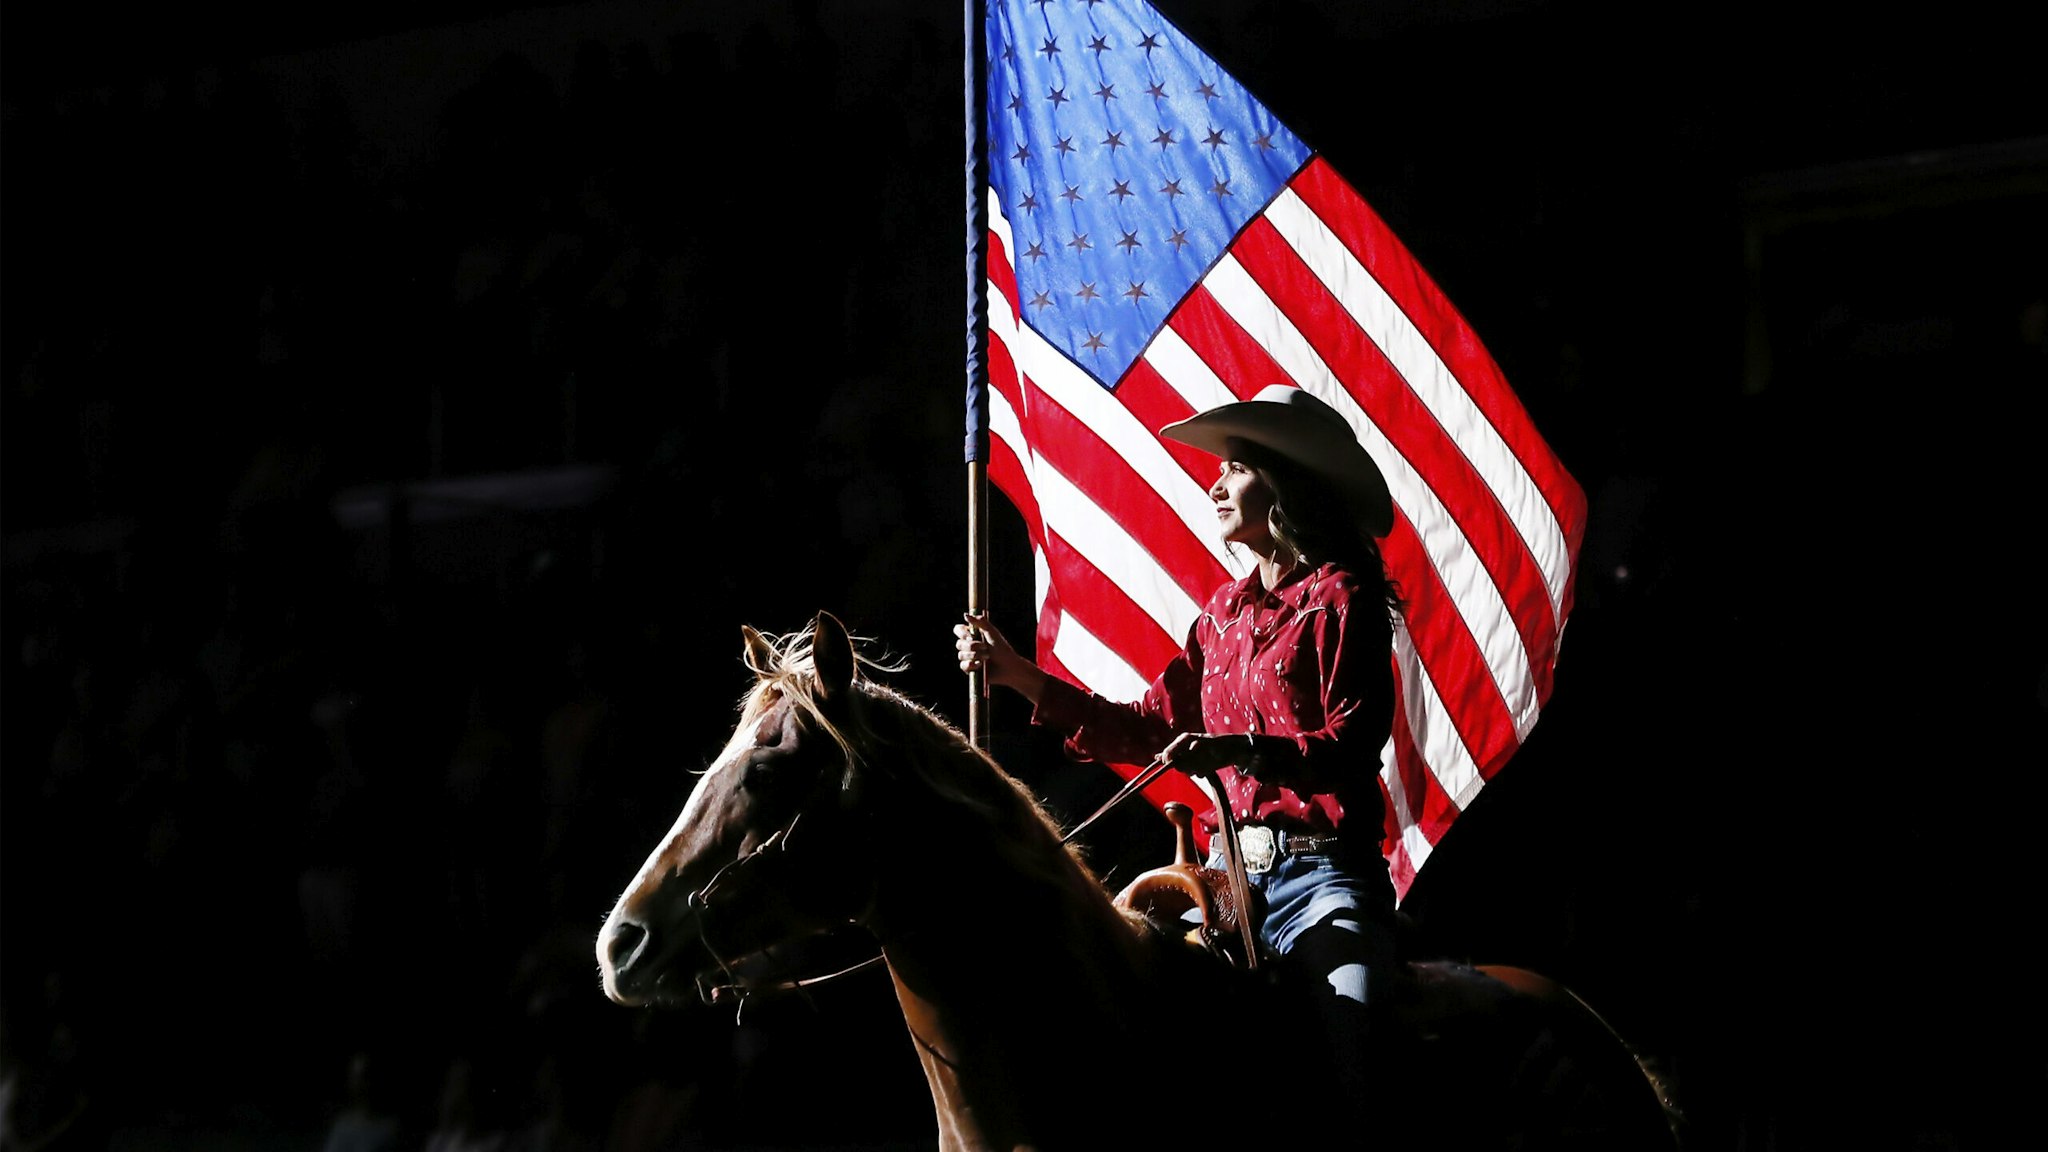 SIOUX FALLS, SD - JULY 11: South Dakota's Governor Kristi Noem holds the U.S flag riding a horse during the Monster Energy Team Challenge, on July 11, 2020, at the Denny Sanford PREMIER Center, Sioux Falls, SD.